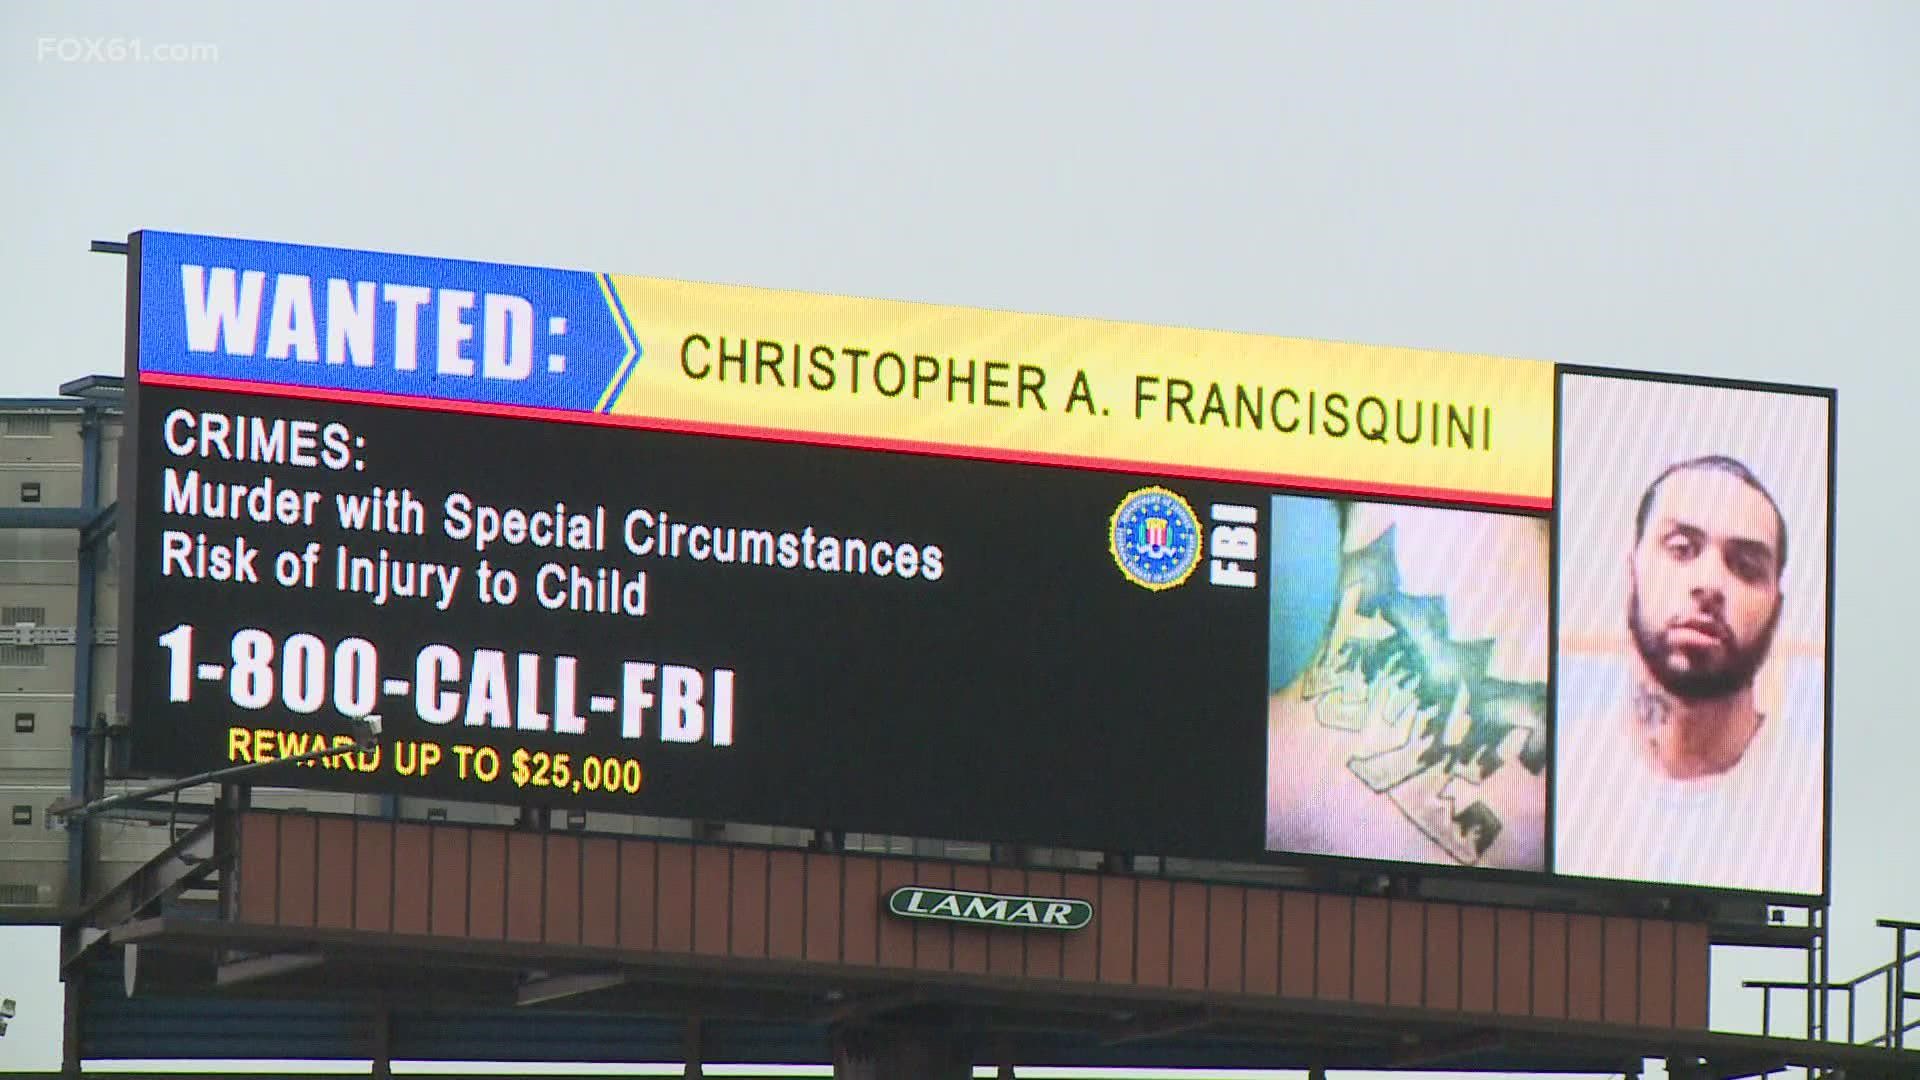 The FBI has increased its reward for information on Christopher Francisquini to 25K.